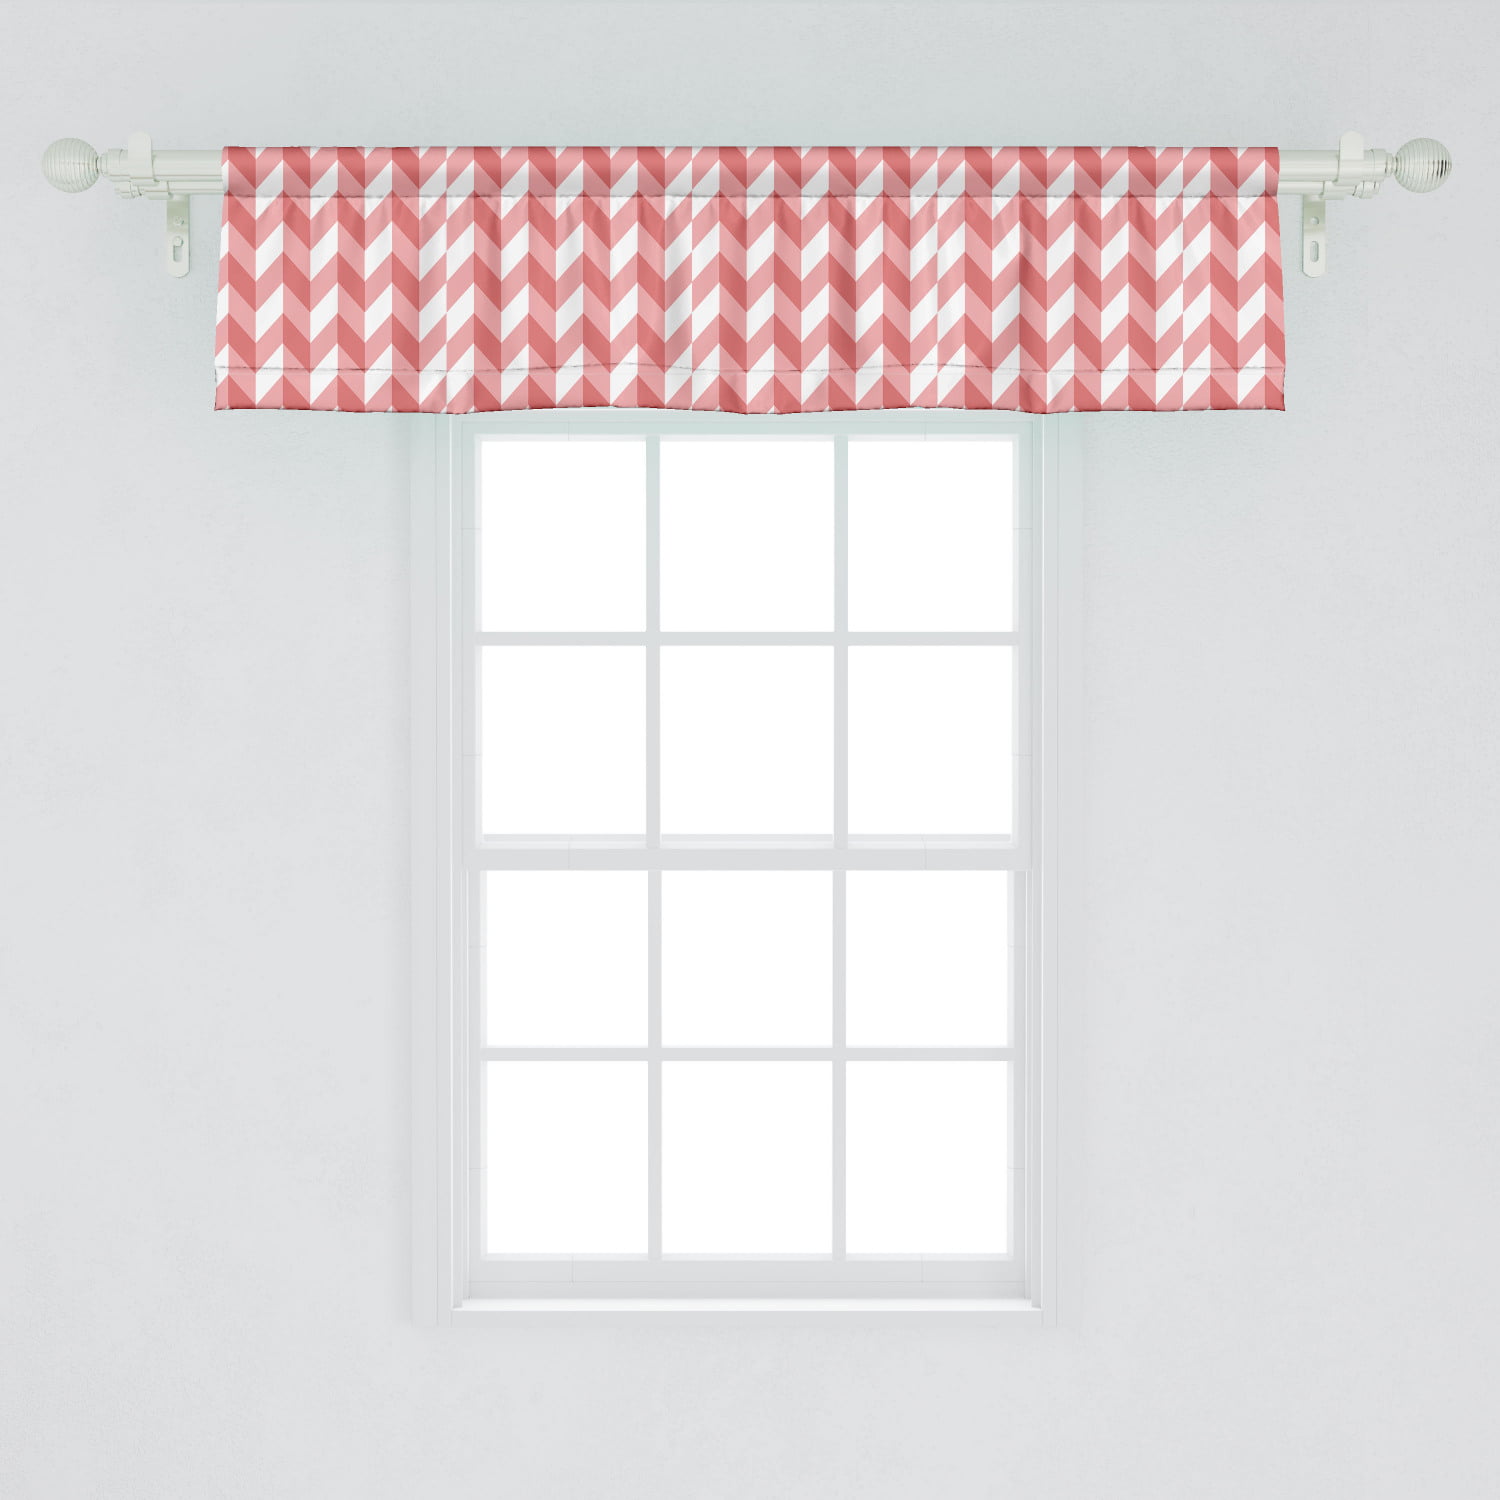 Coral and Teal Watercolor Arrows Window Valance 56  x 18 